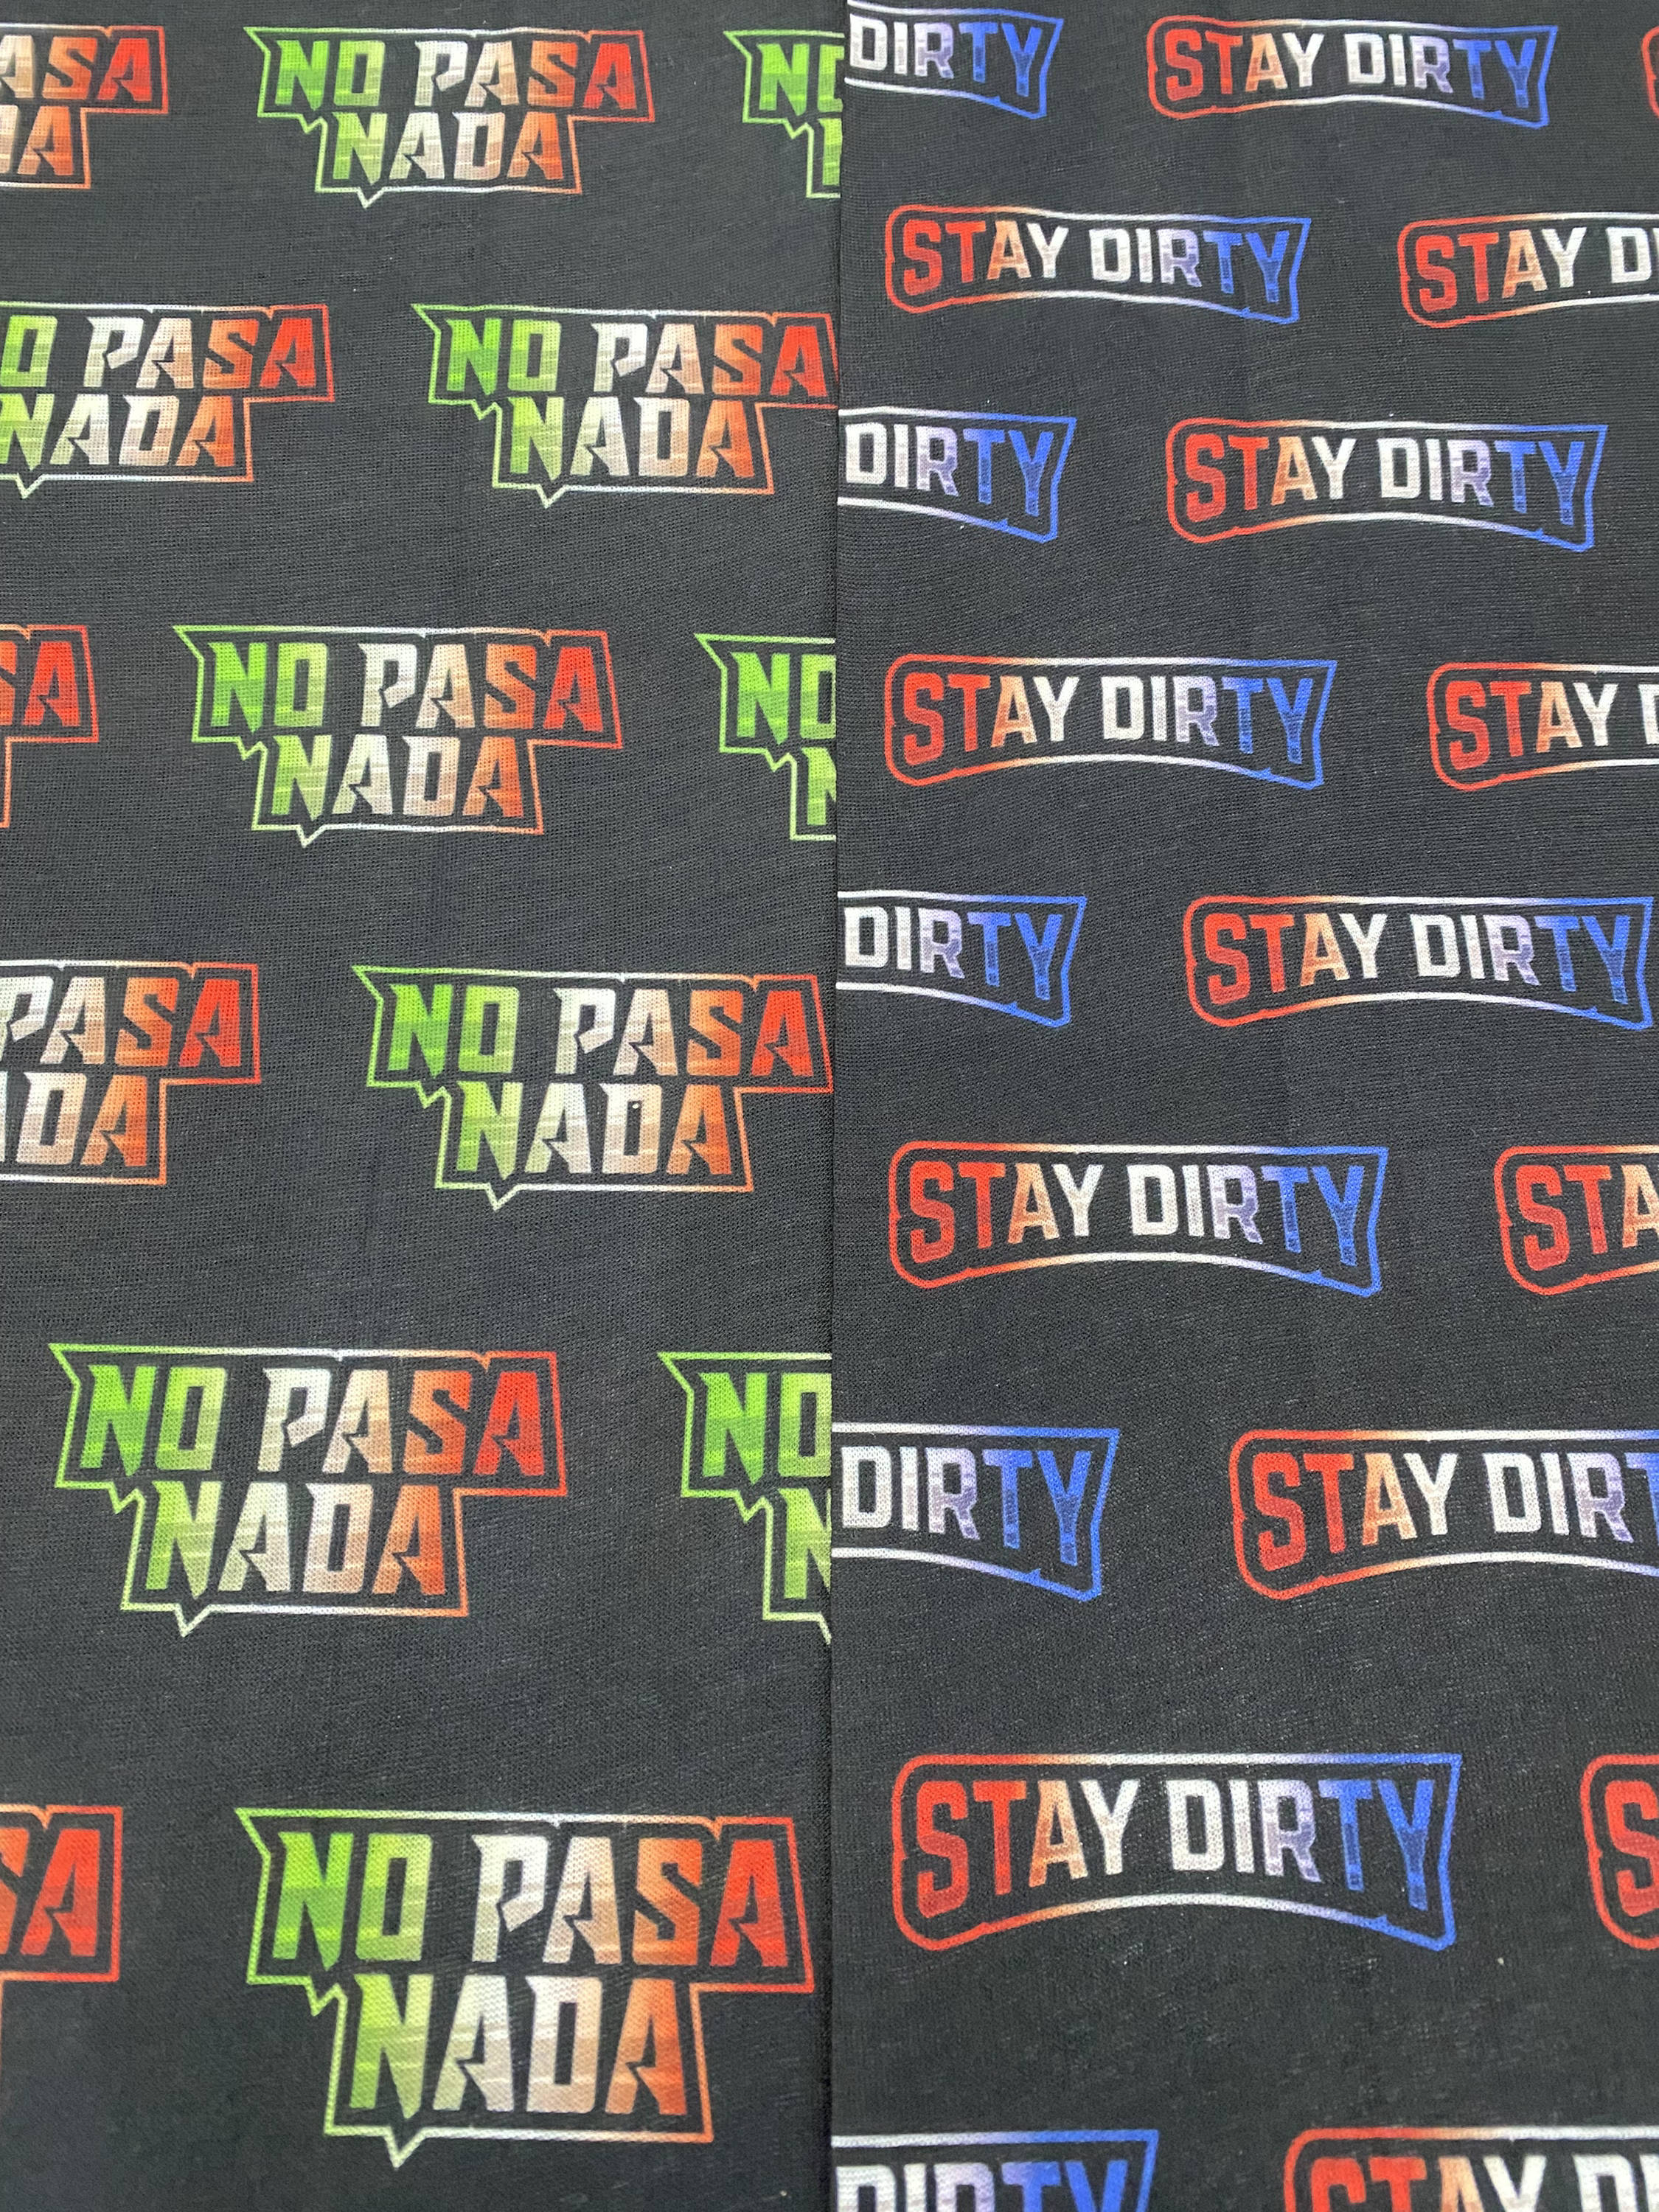 Stay Dirty Neck Gaiter - Dust Mask